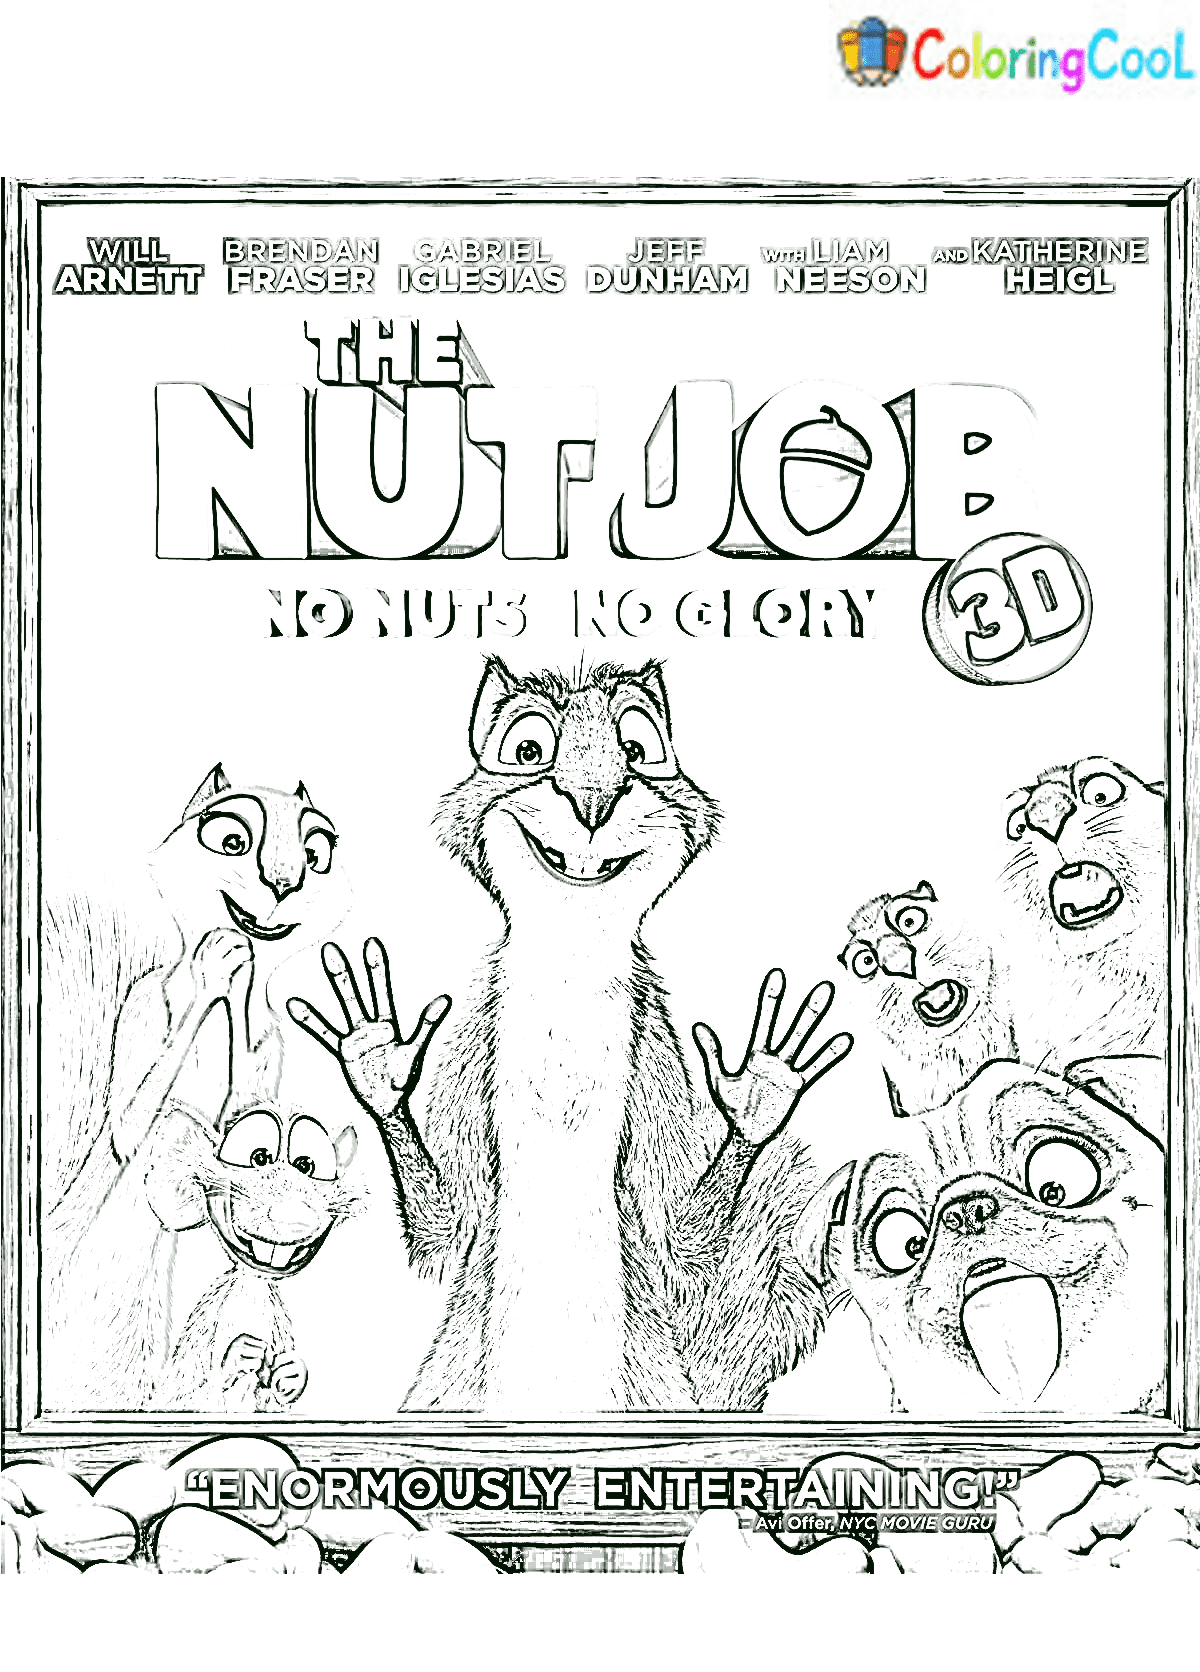 Funny The Nut Job Image